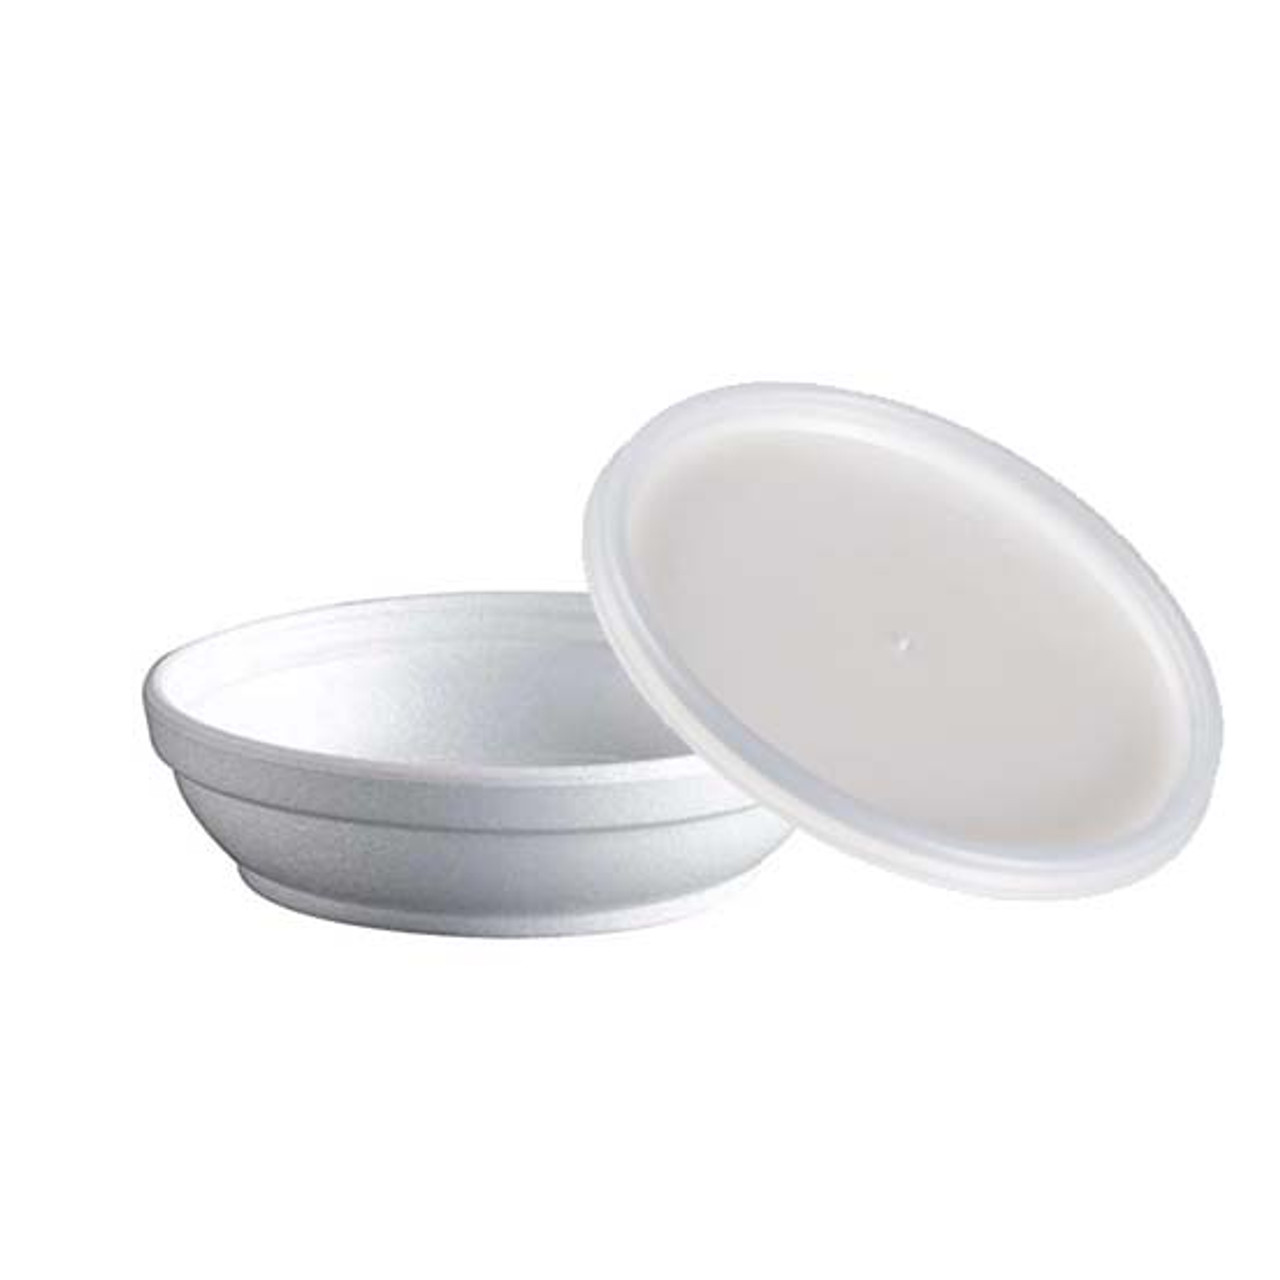 Dart 5oz. Insulated White Foam Container with optional lid - Pack of 100